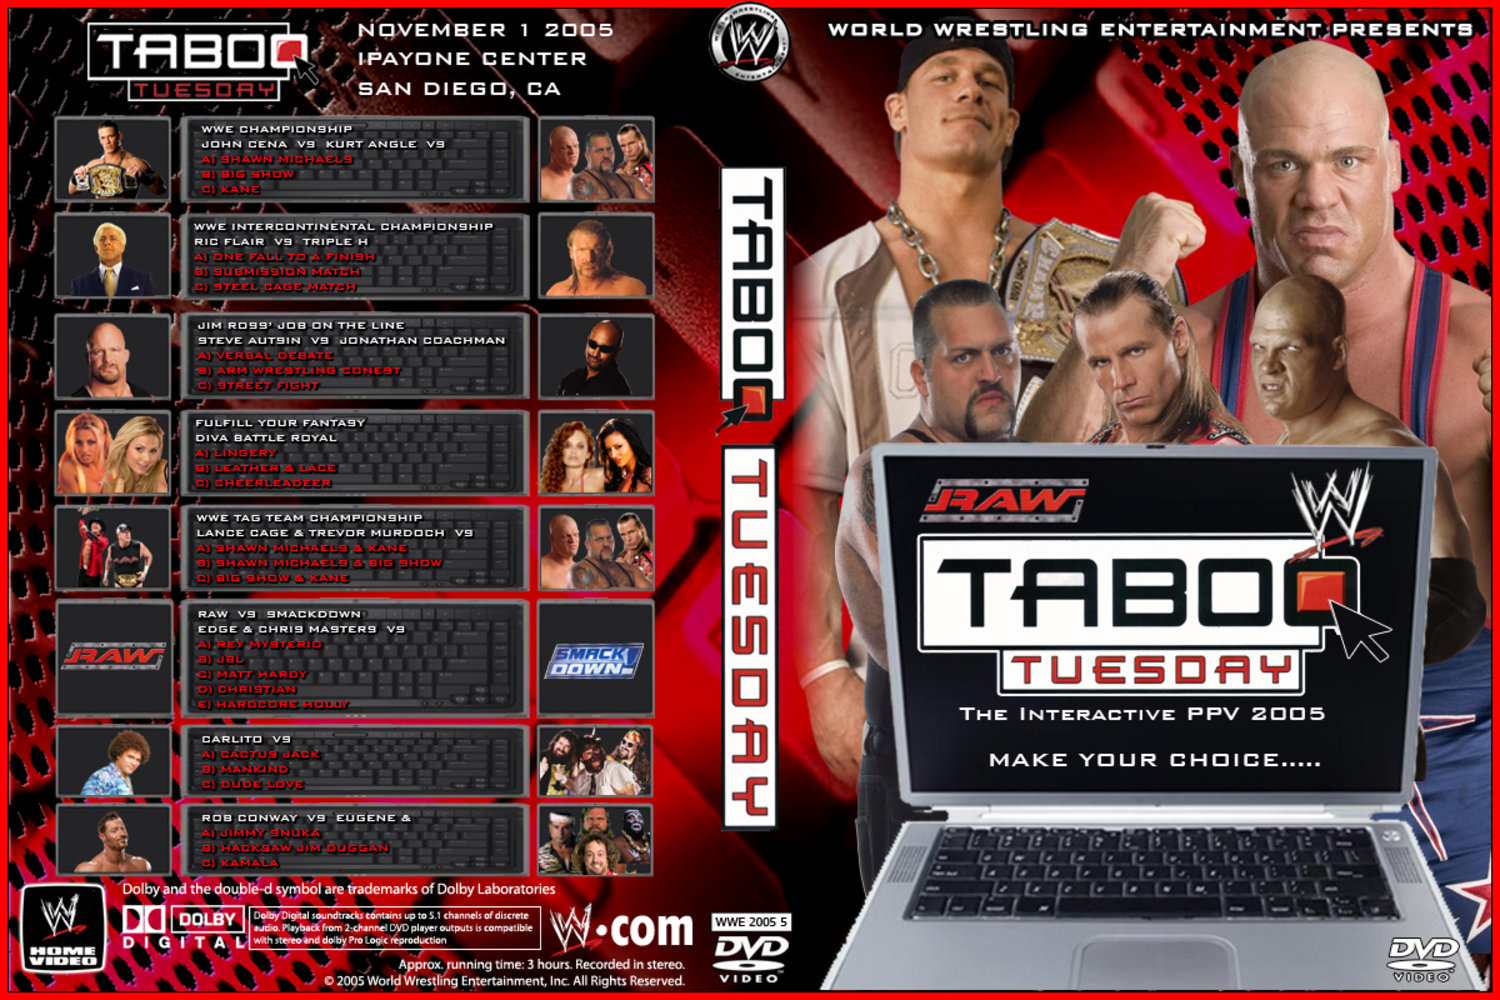 Jaquette DVD WWE Taboo Tuesday 2005